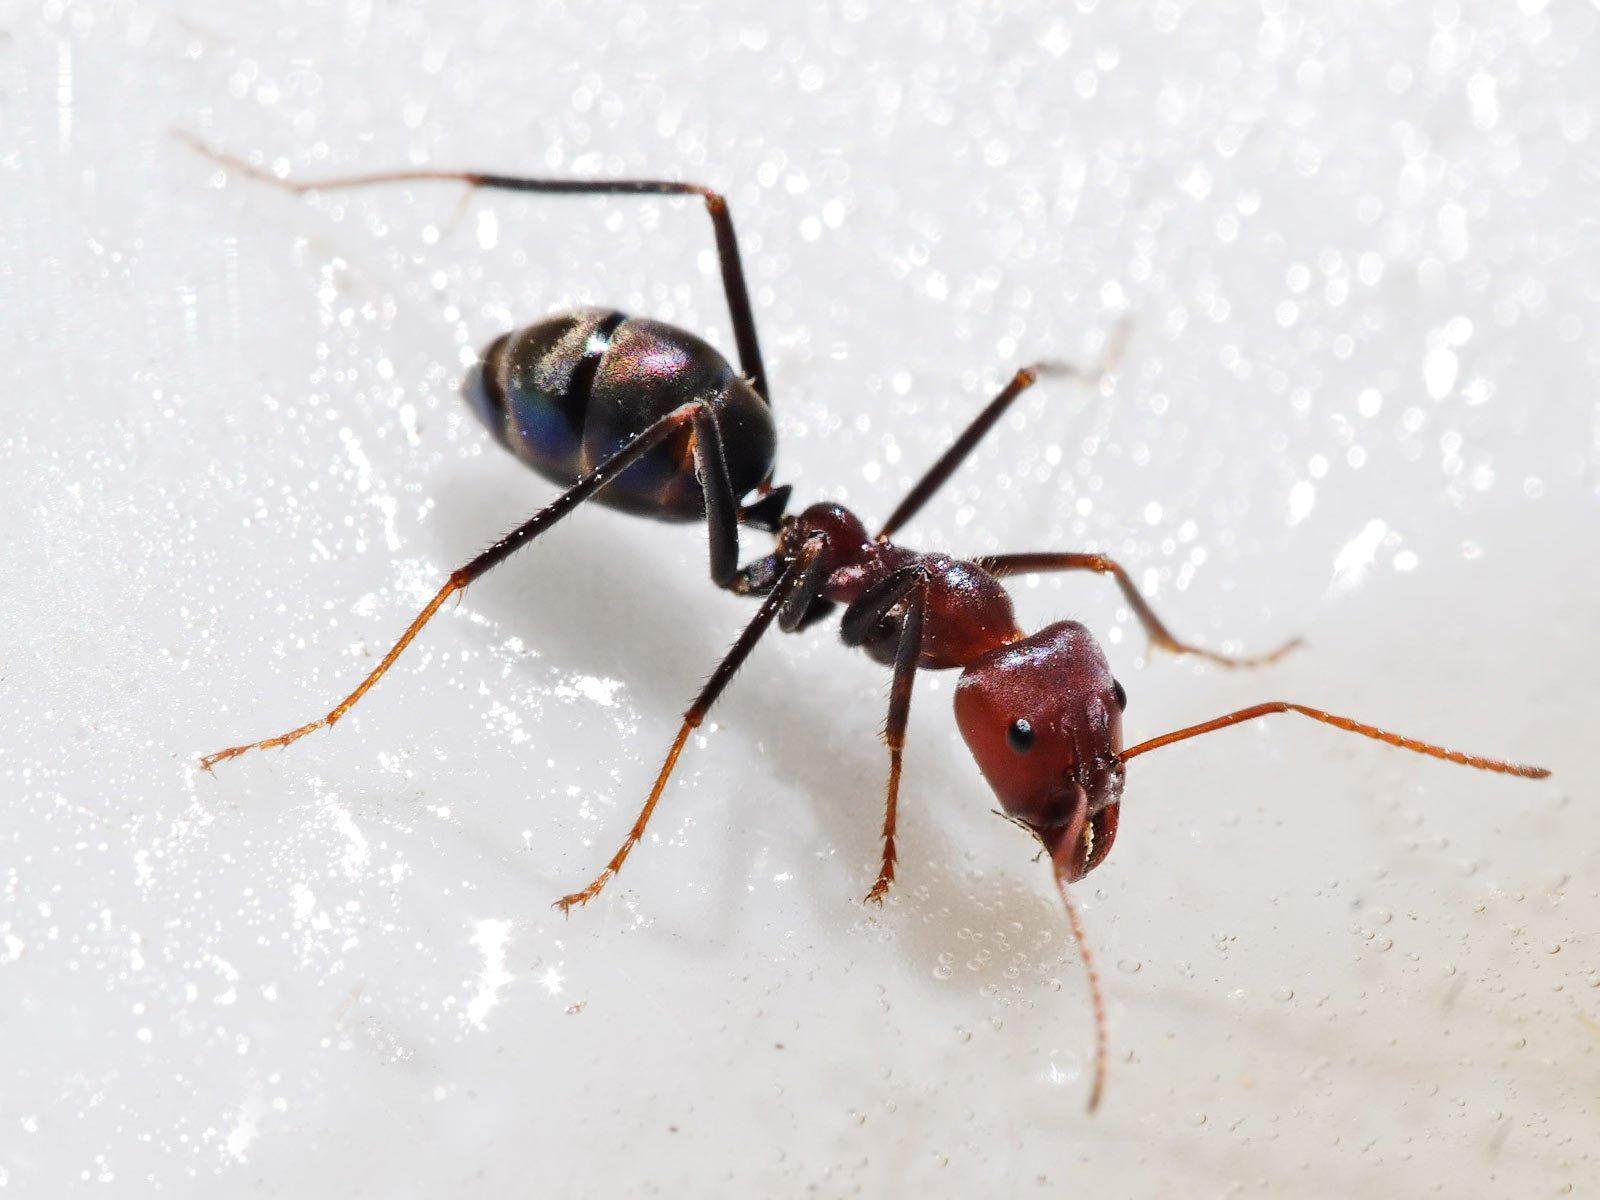 Carpenter Ant Hd Wallpapers For Pc